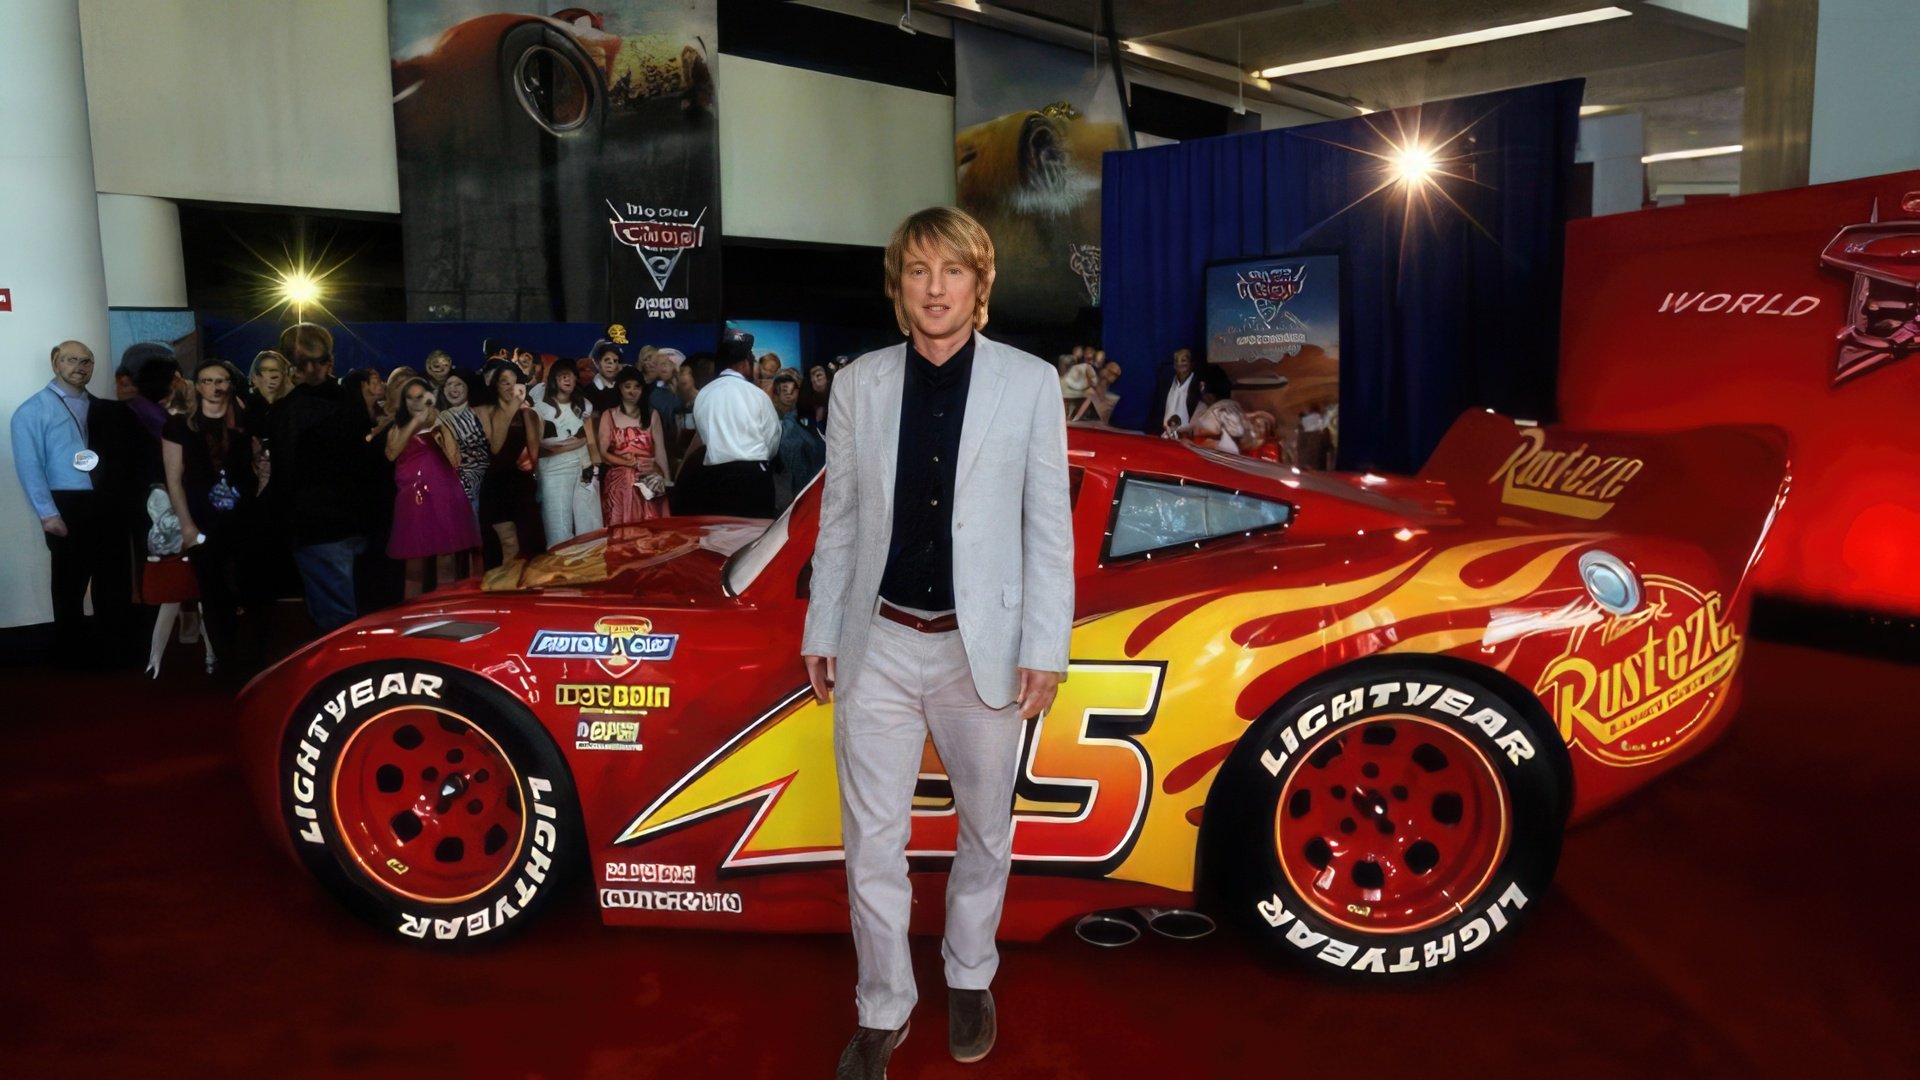 Owen Wilson at the premiere of the animated movie Cars 3